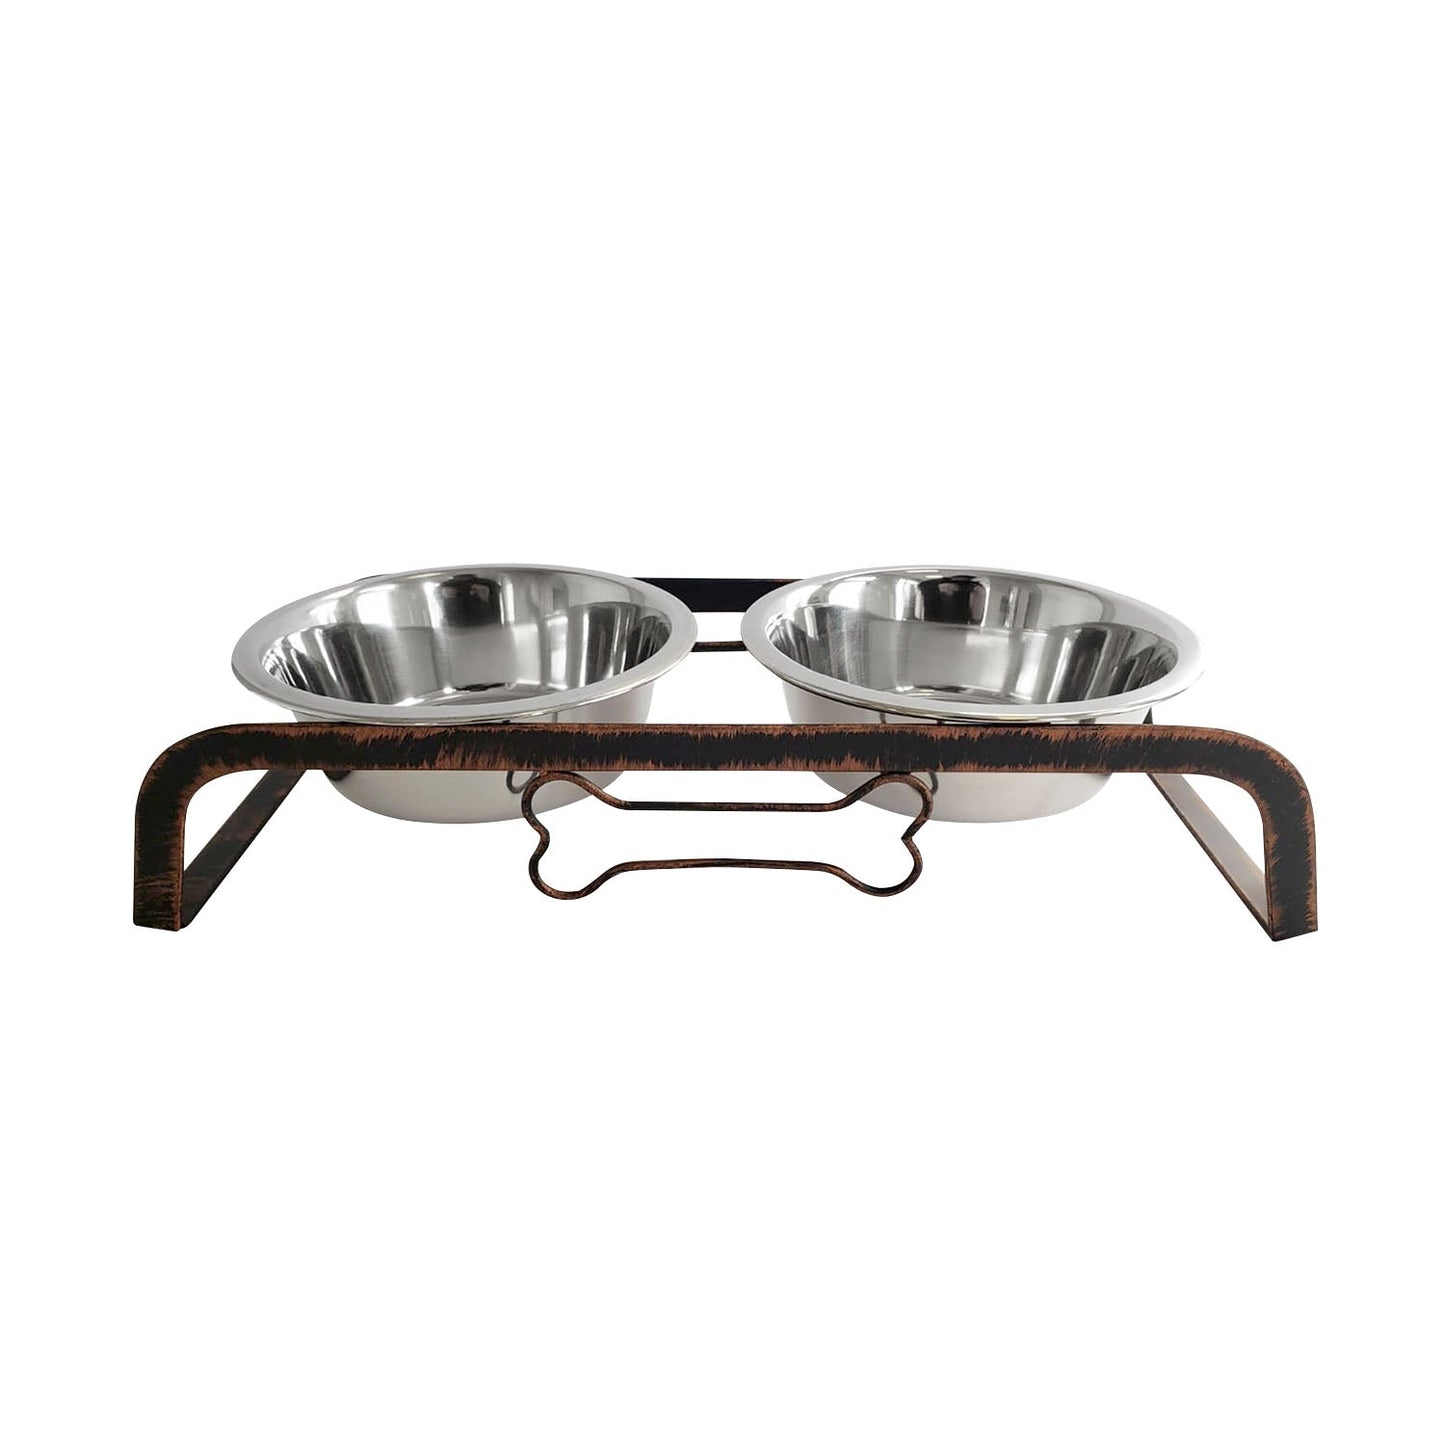 Country Living Elevated Rustic Design Dog Bone Feeder with 2 Stainless Steel Bowls